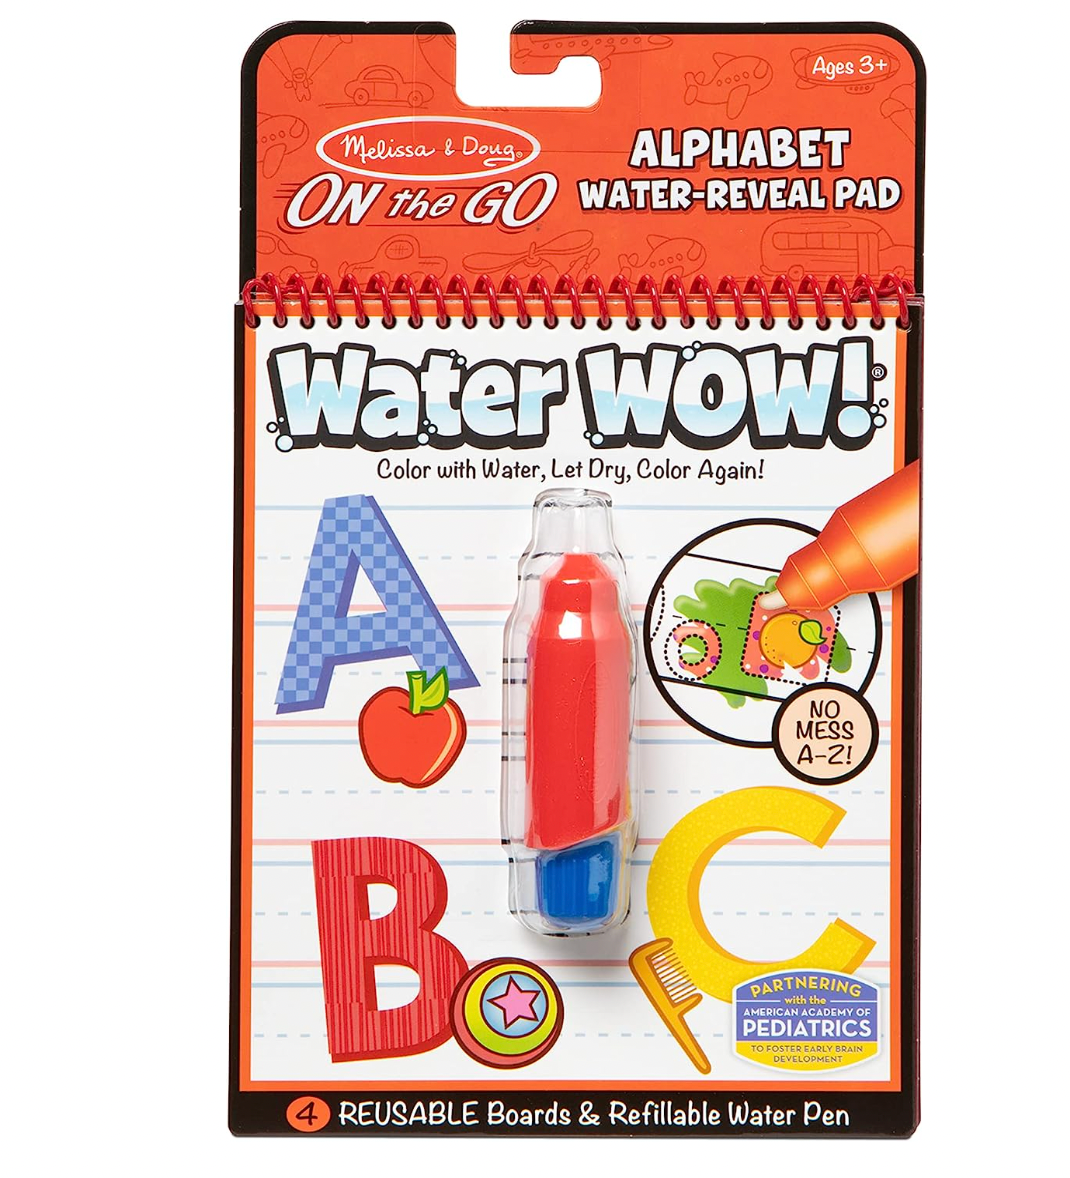 Melissa & Doug - On the Go Water Wow! Reusable Water-Reveal Activity Pad - Alphabet